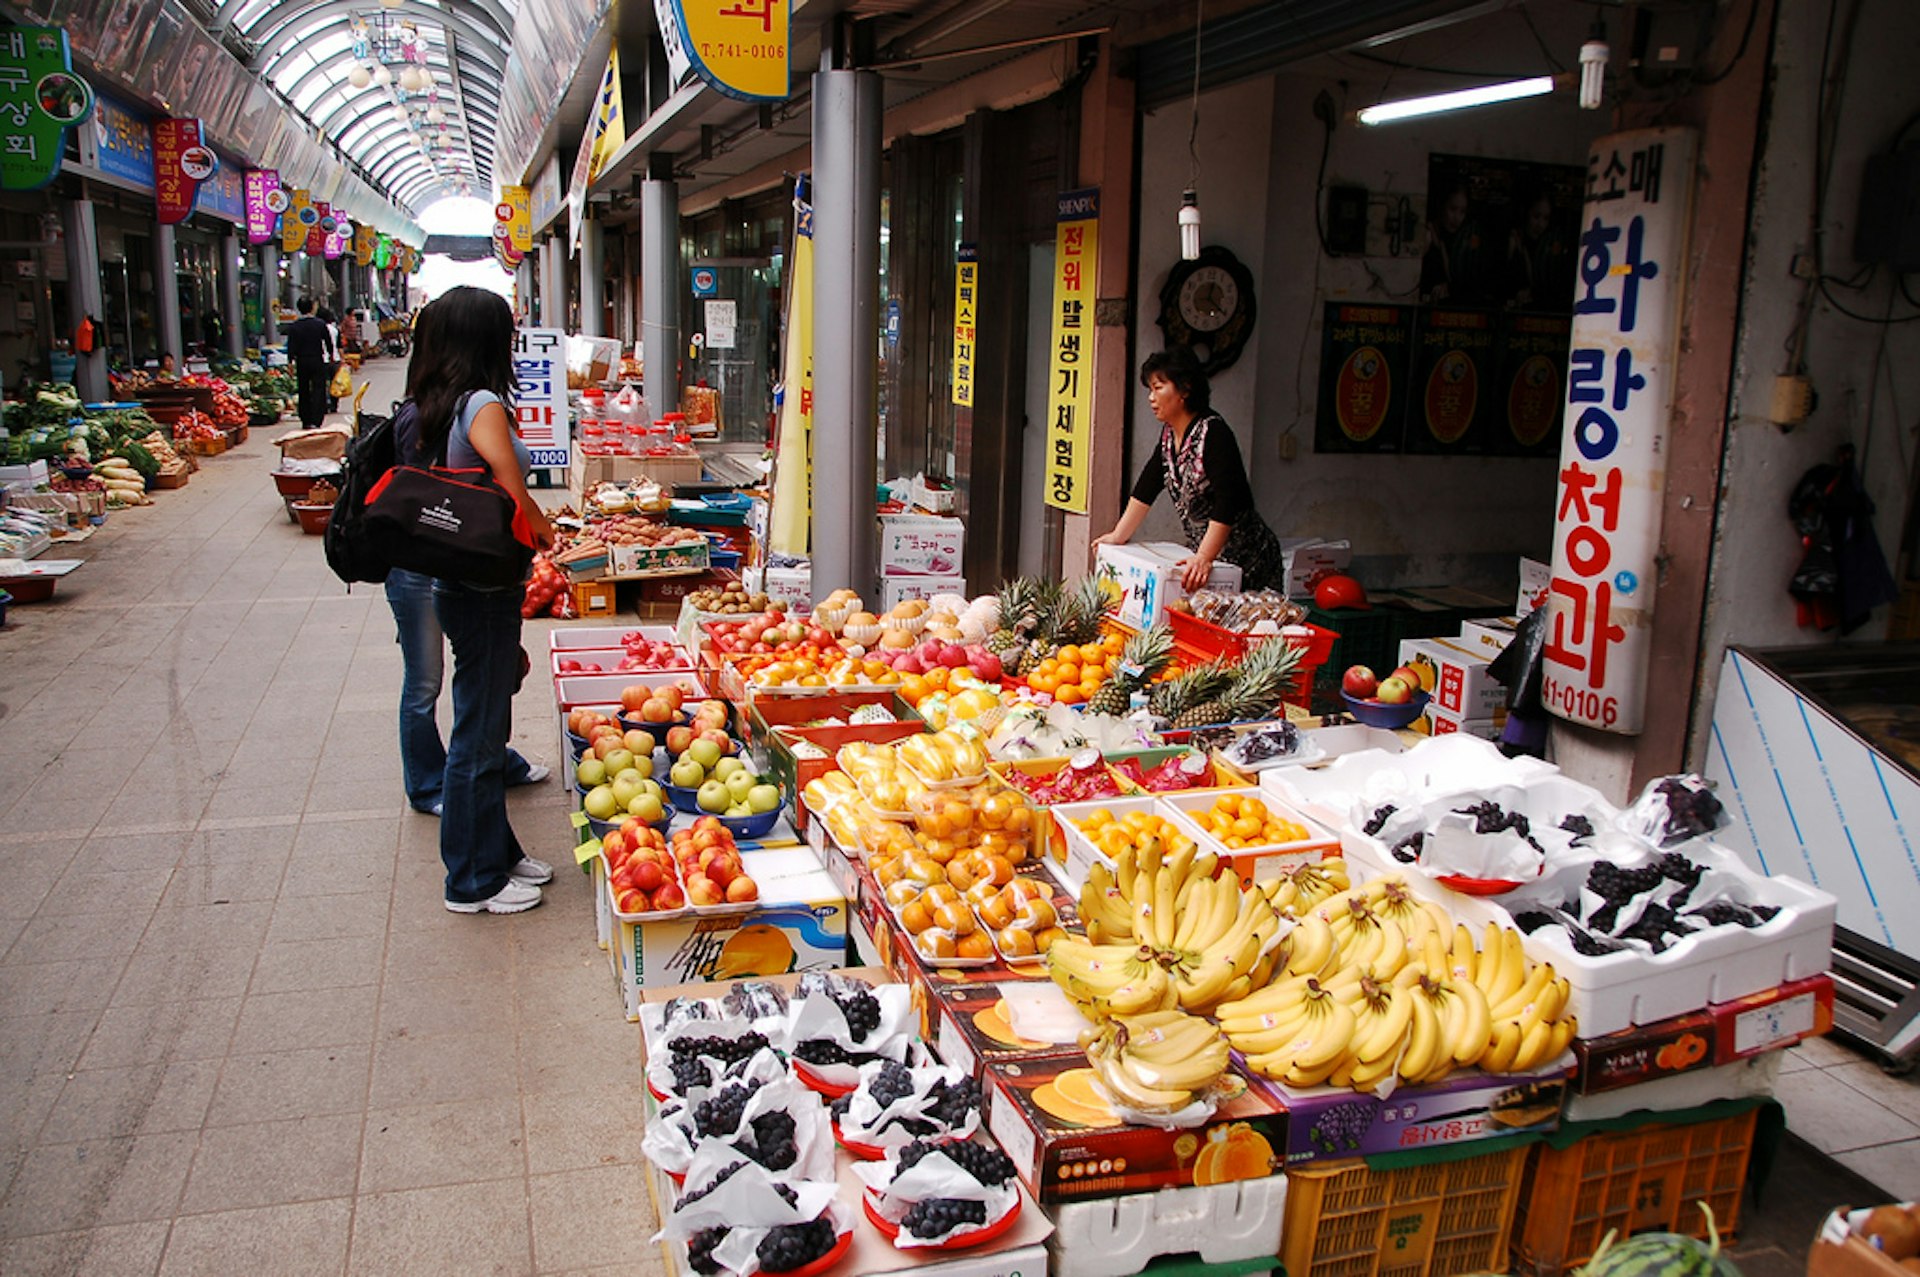 Seongdong Market is a good place to pick up picnic supplies. Image by riNux / CC BY-SA 2.0